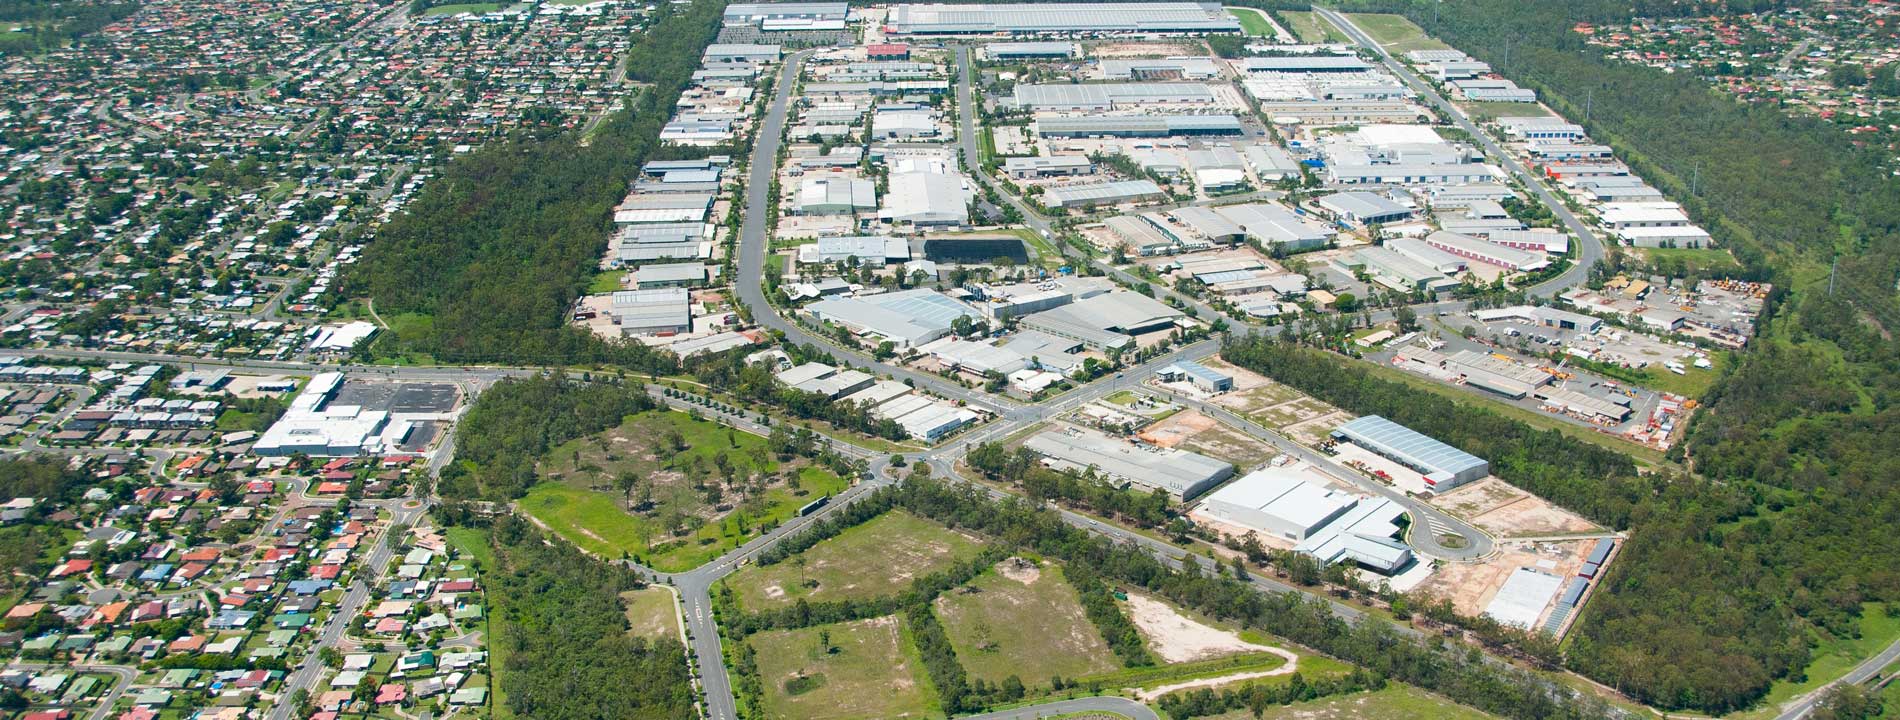 View of the Crestmead Industrial estate from an airplane